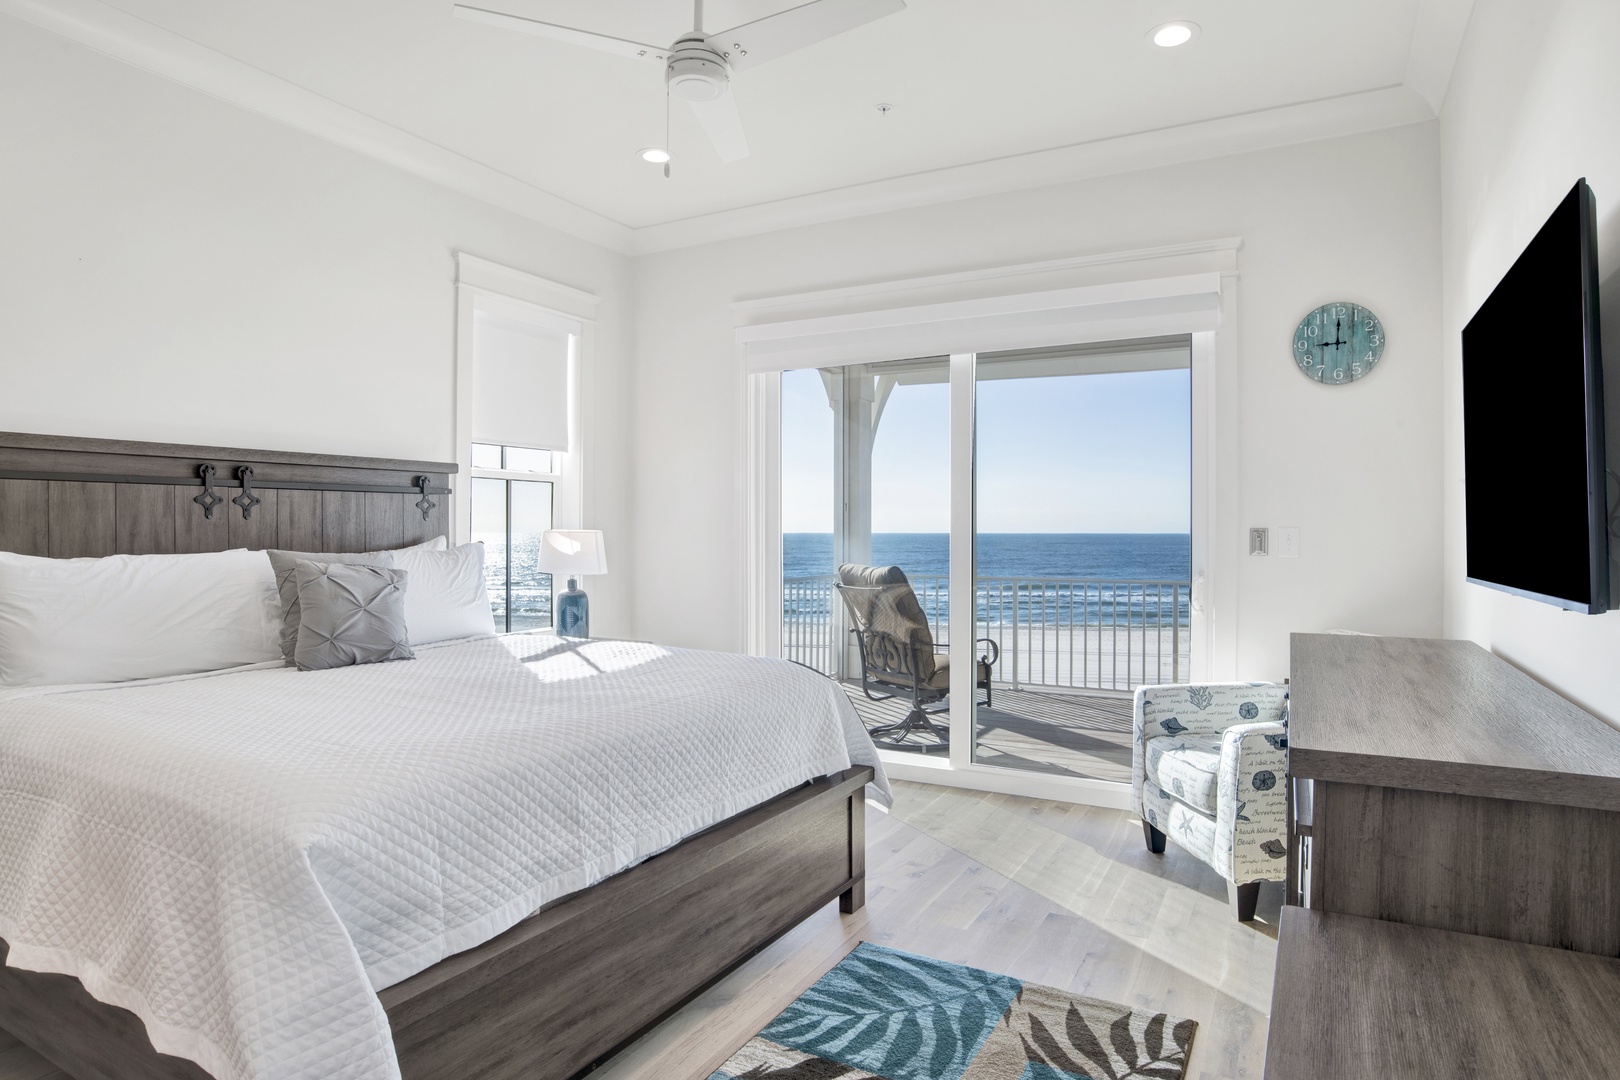 Bedroom 4 is on the 2nd floor with a king bed, TV, Gulf views and balcony access